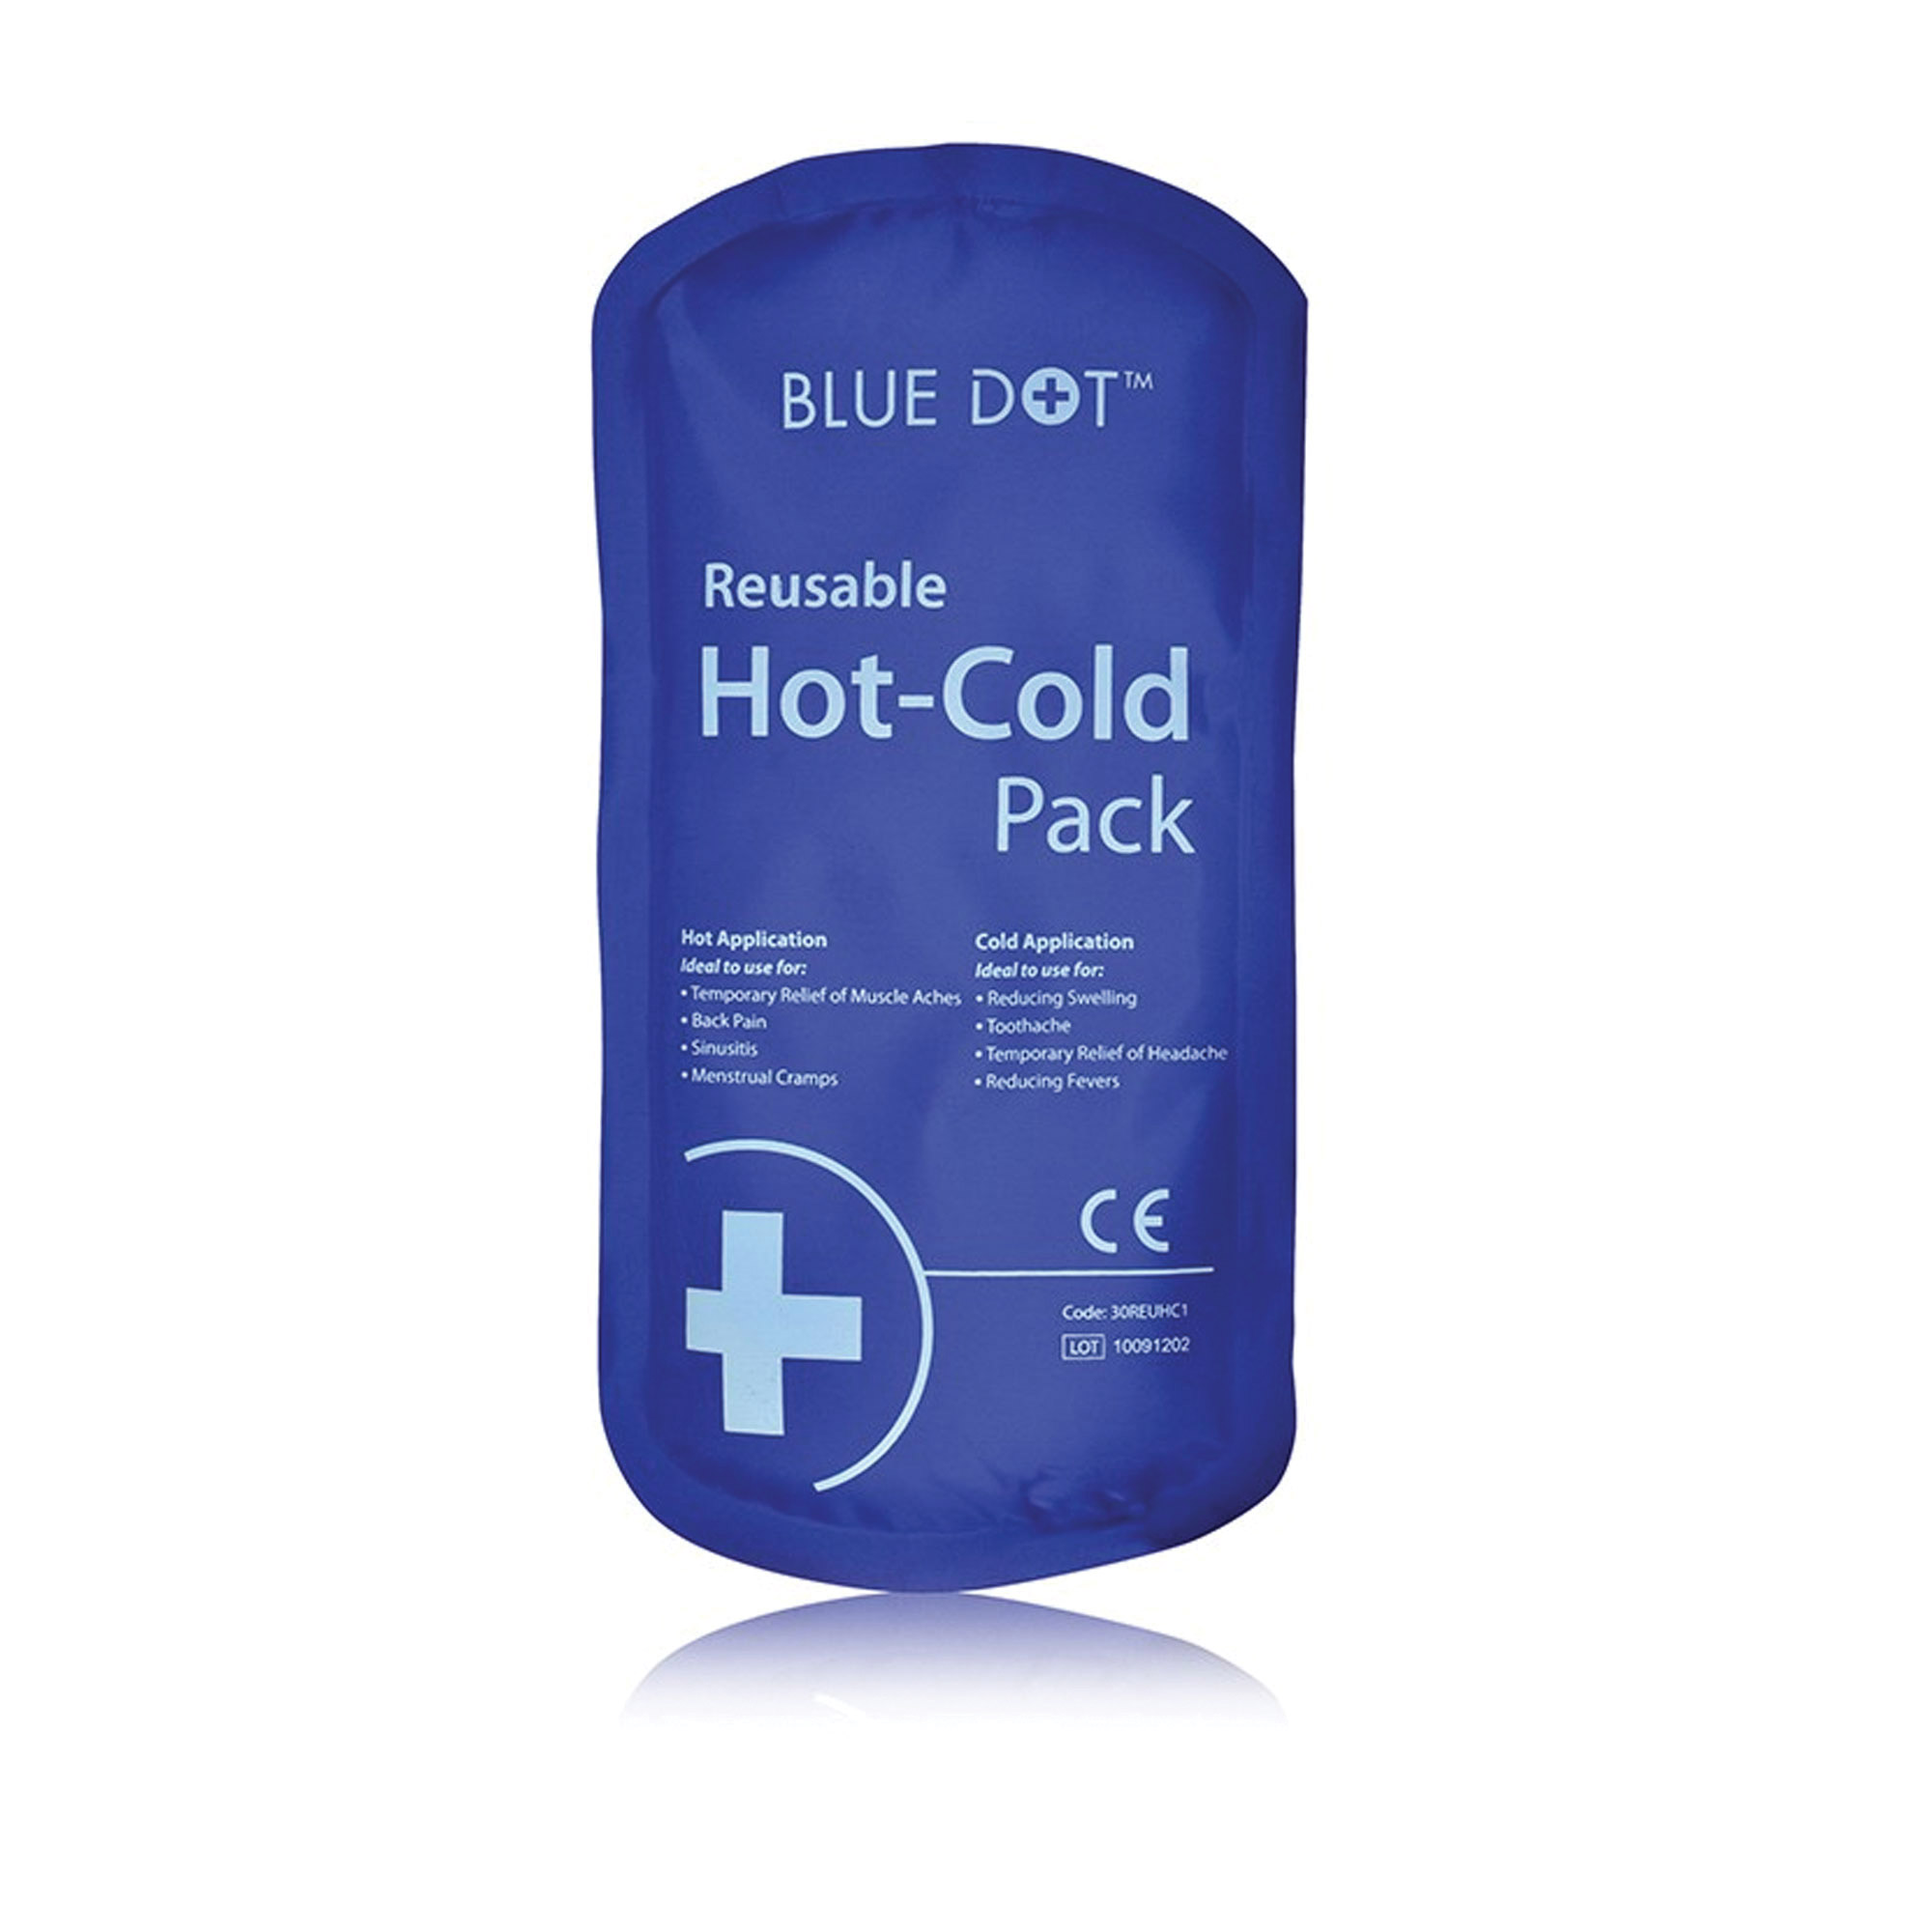 Reusable Hot and Cold Pack - Each